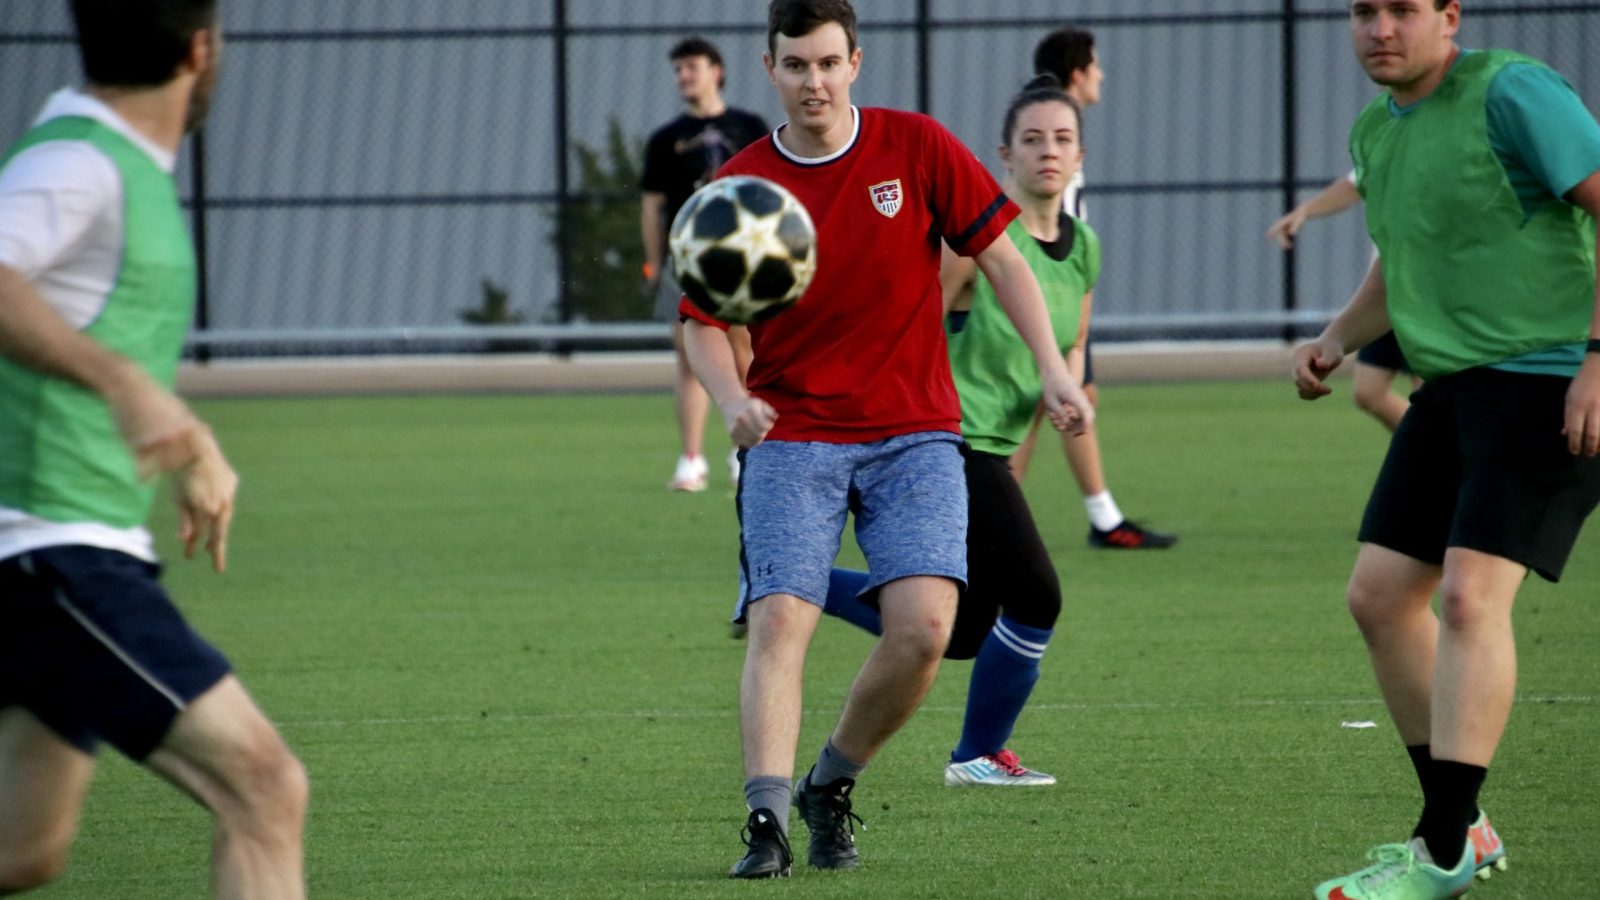 Chris eyeing a flying soccer ball in the field while surrounded by the opposing team